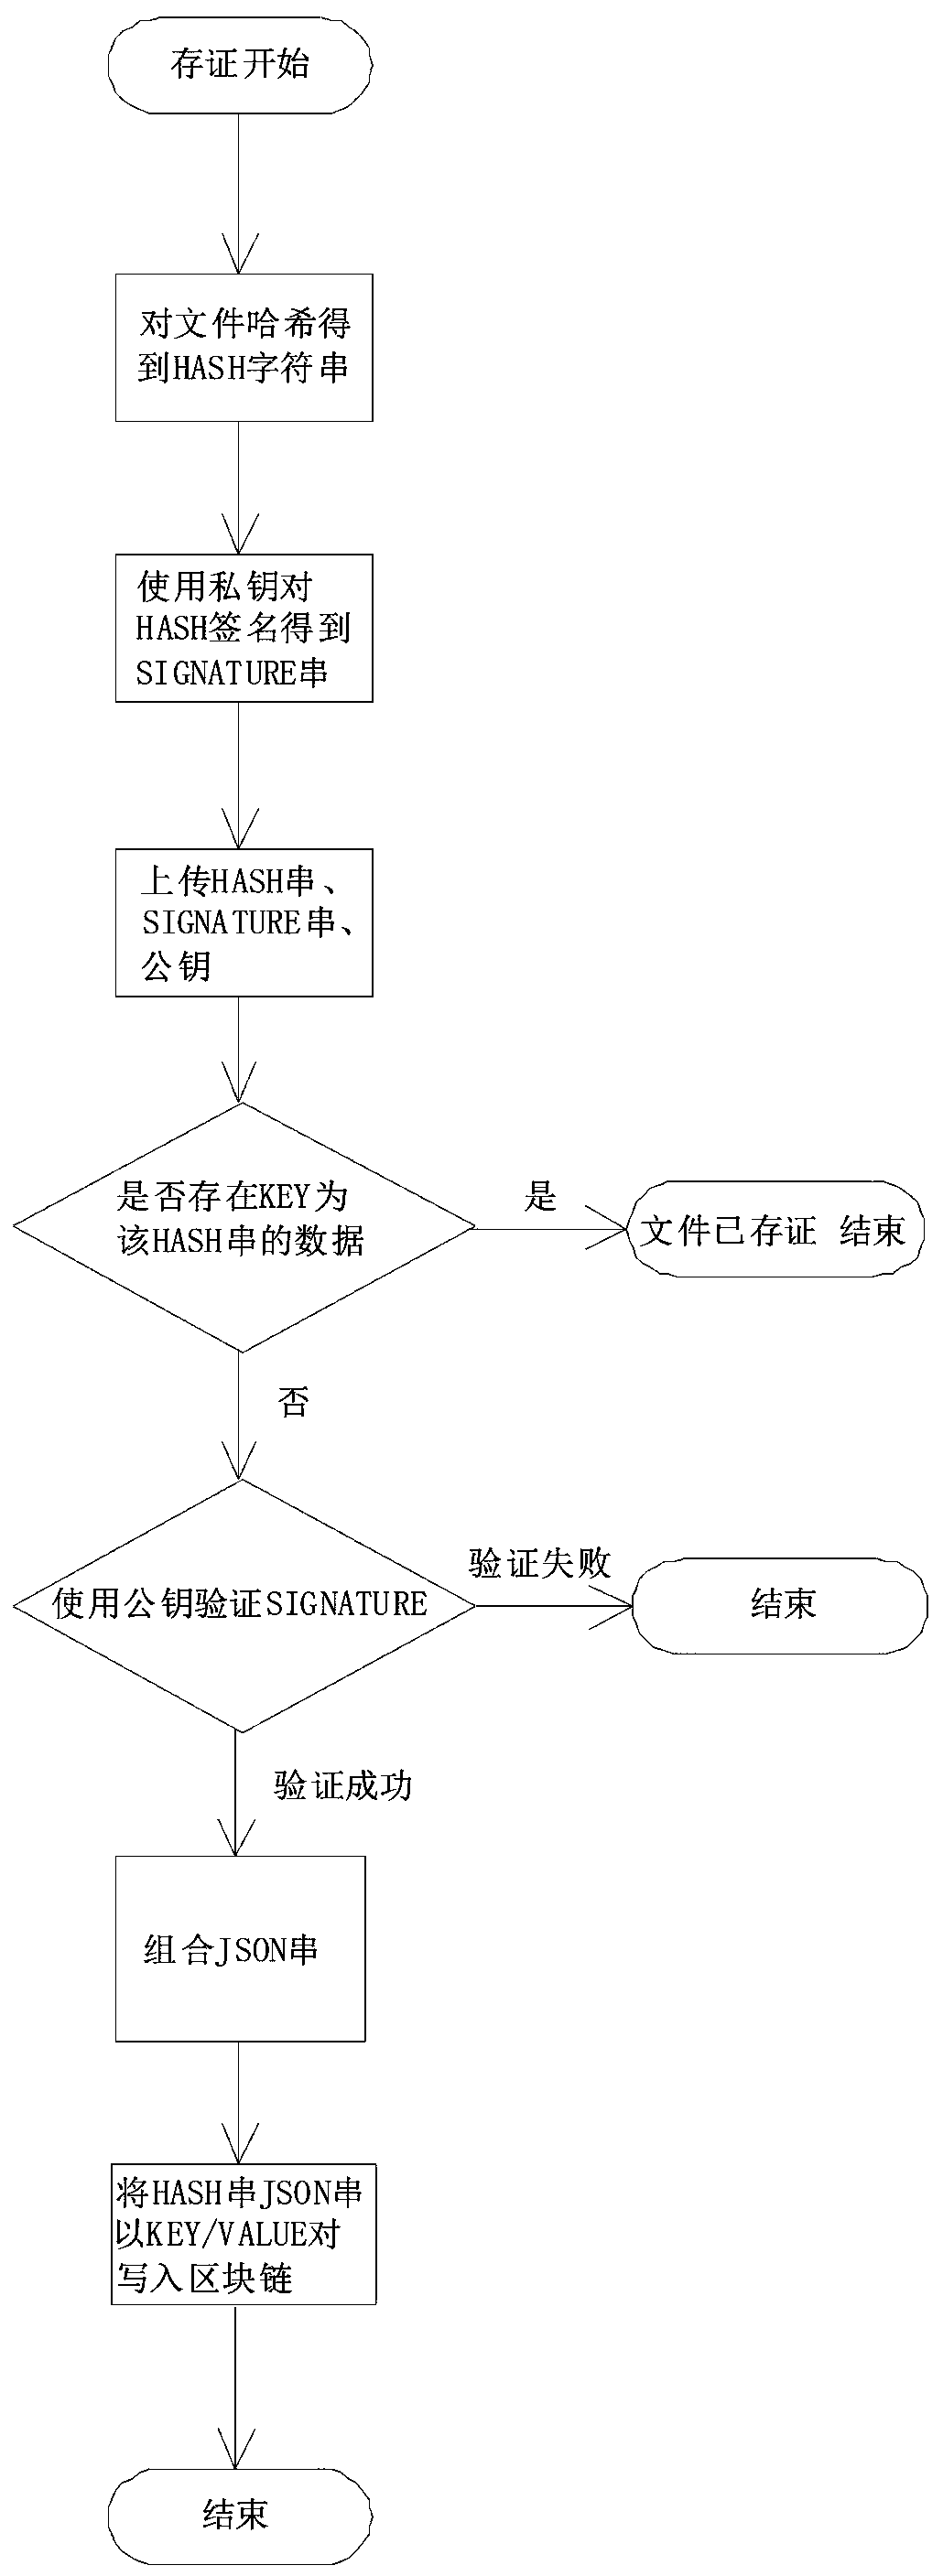 Method for implementing file evidence storage and authentication based on blockchain